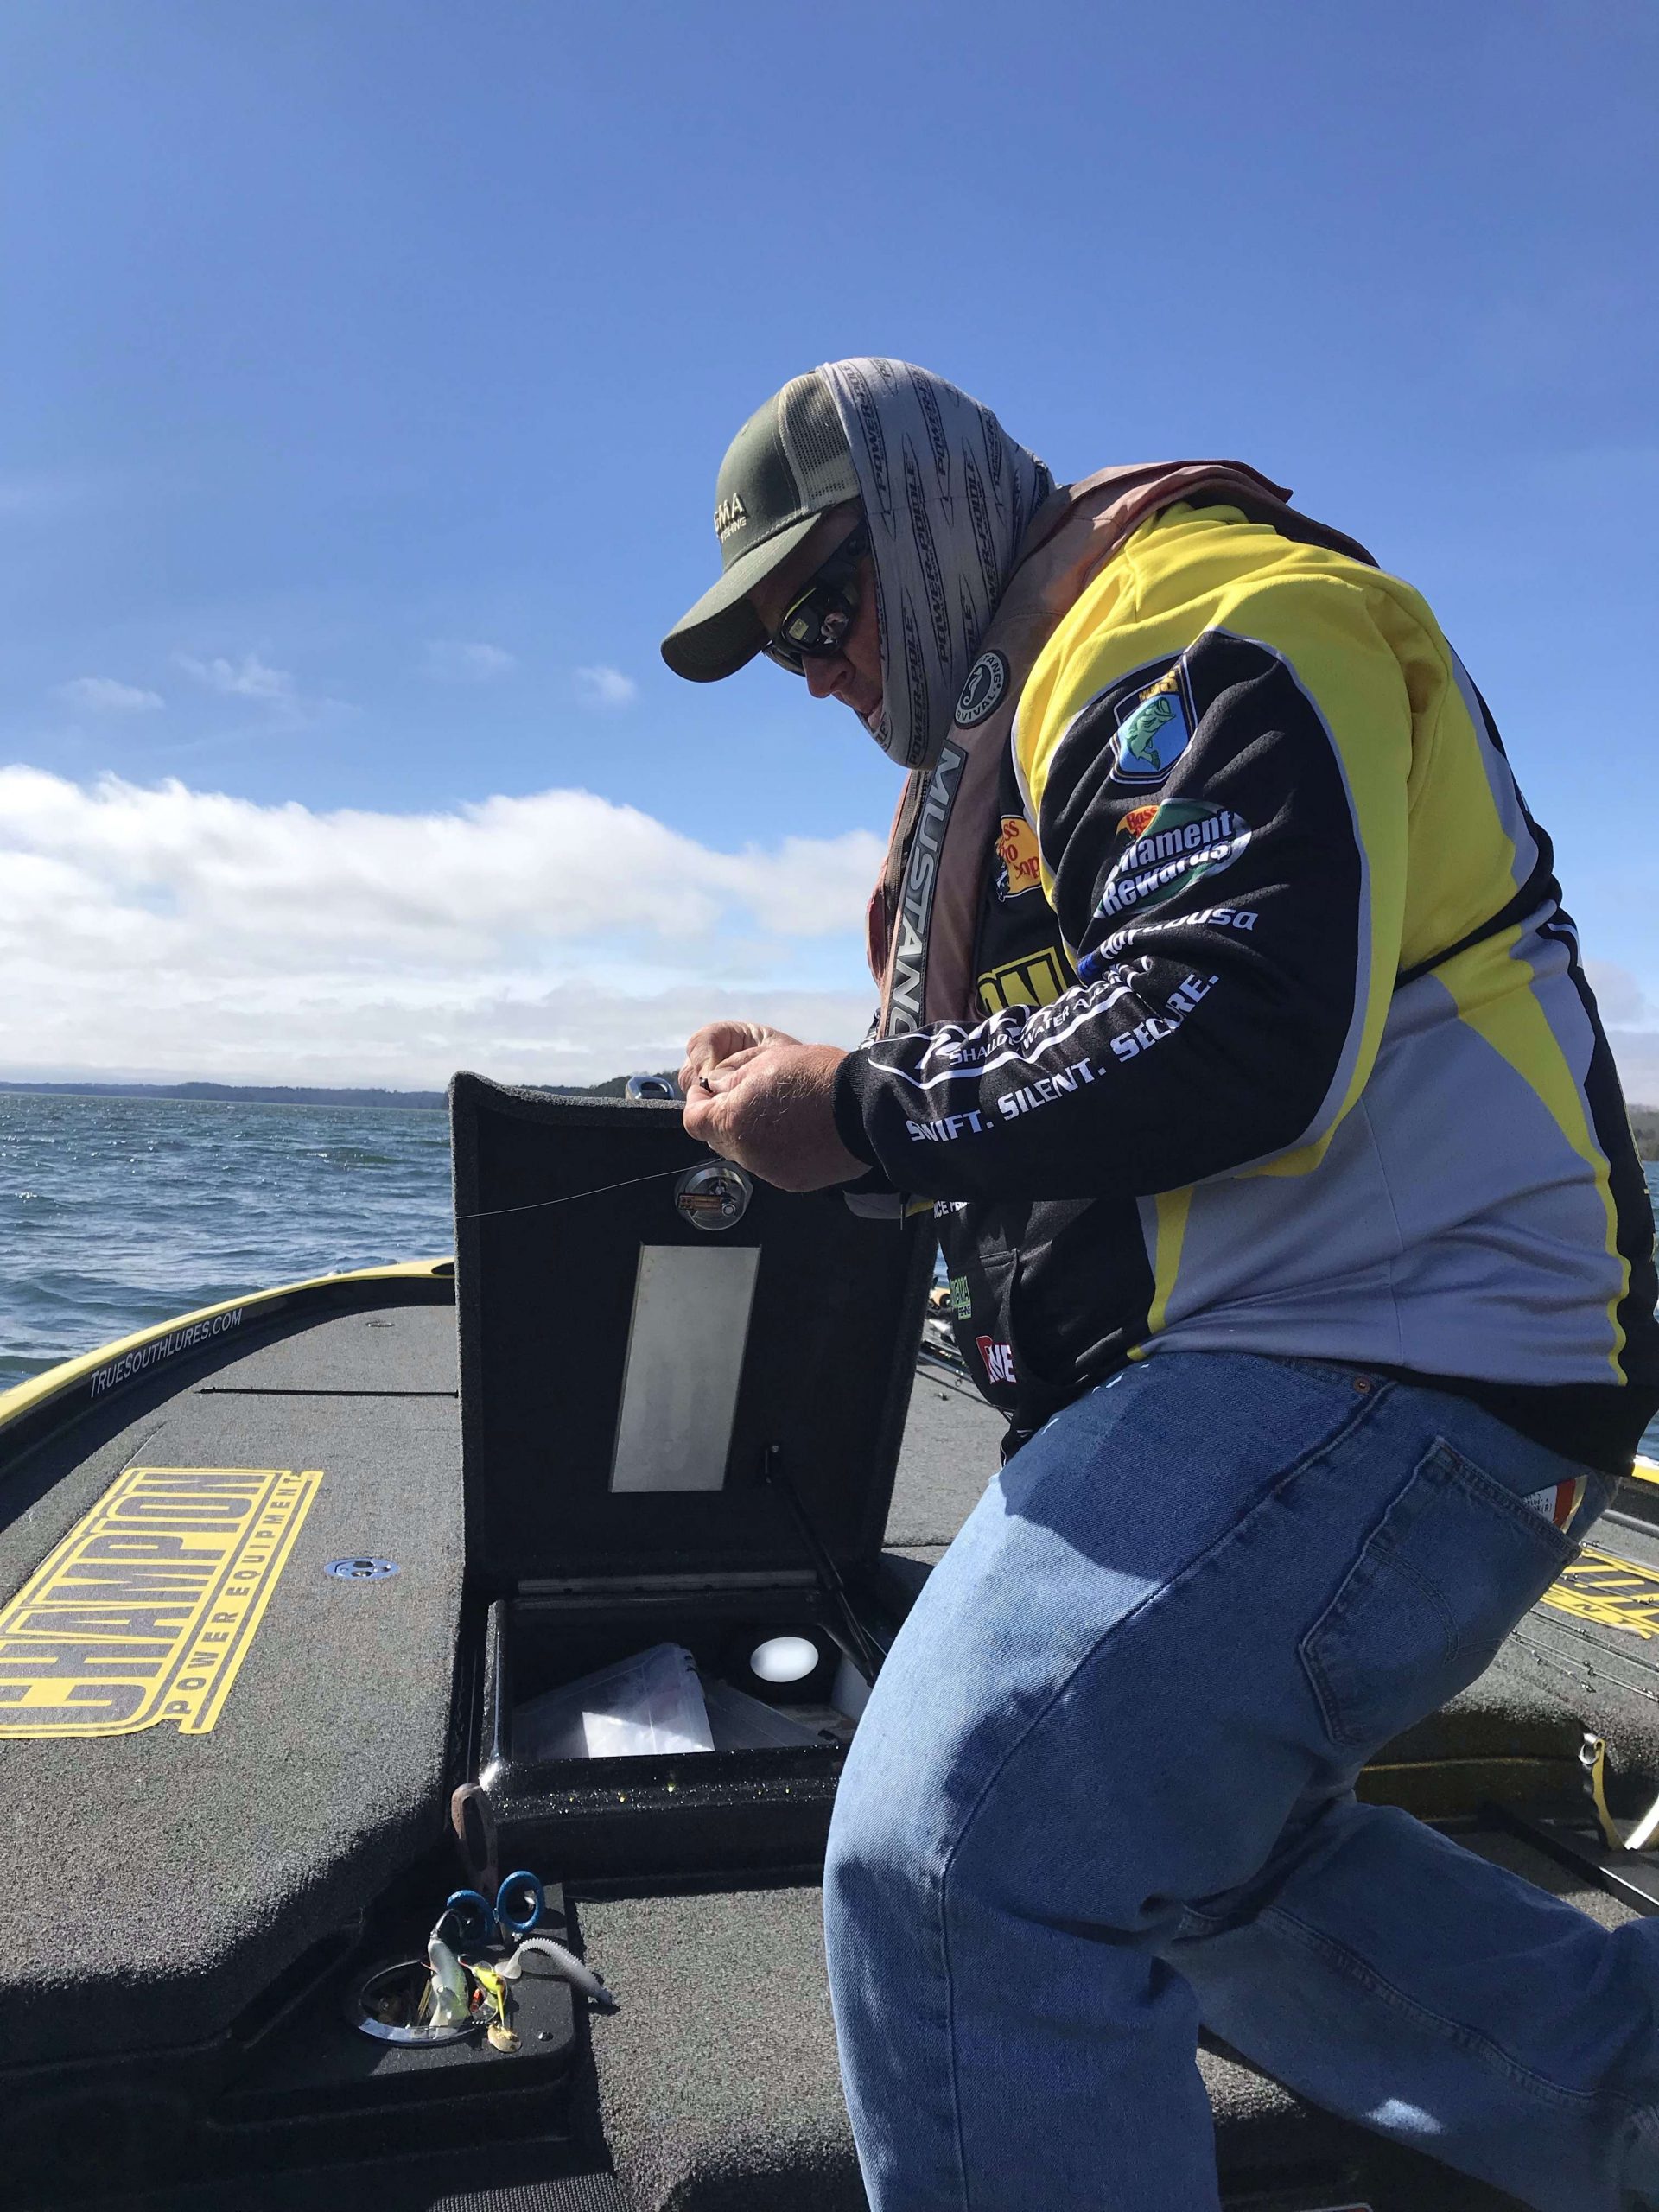 Shane Lineberger is one fish from a limit, and likely one good fish from making his first elite series top 12. He hasnât had a bite in 2 hours, and now heâs having battery challenges. With that said, heâs made a move, is tying on a different lure, and has just under 2 hours to get that one solid bite he needs.